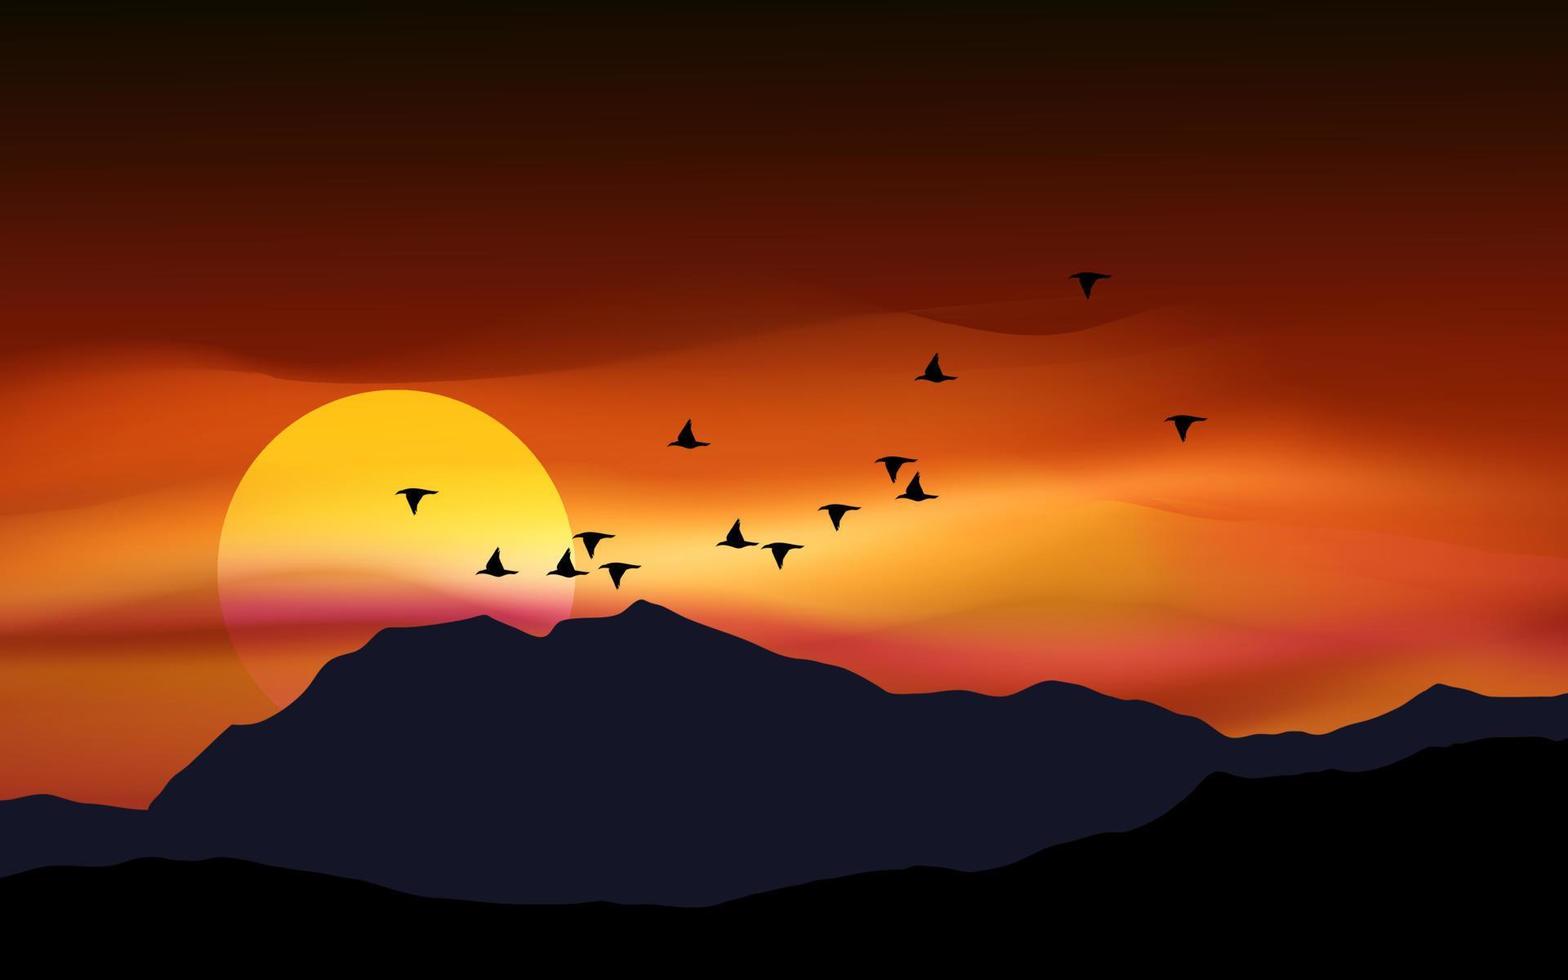 Sunset at mountain and hill. Sundown over mountain with birds vector